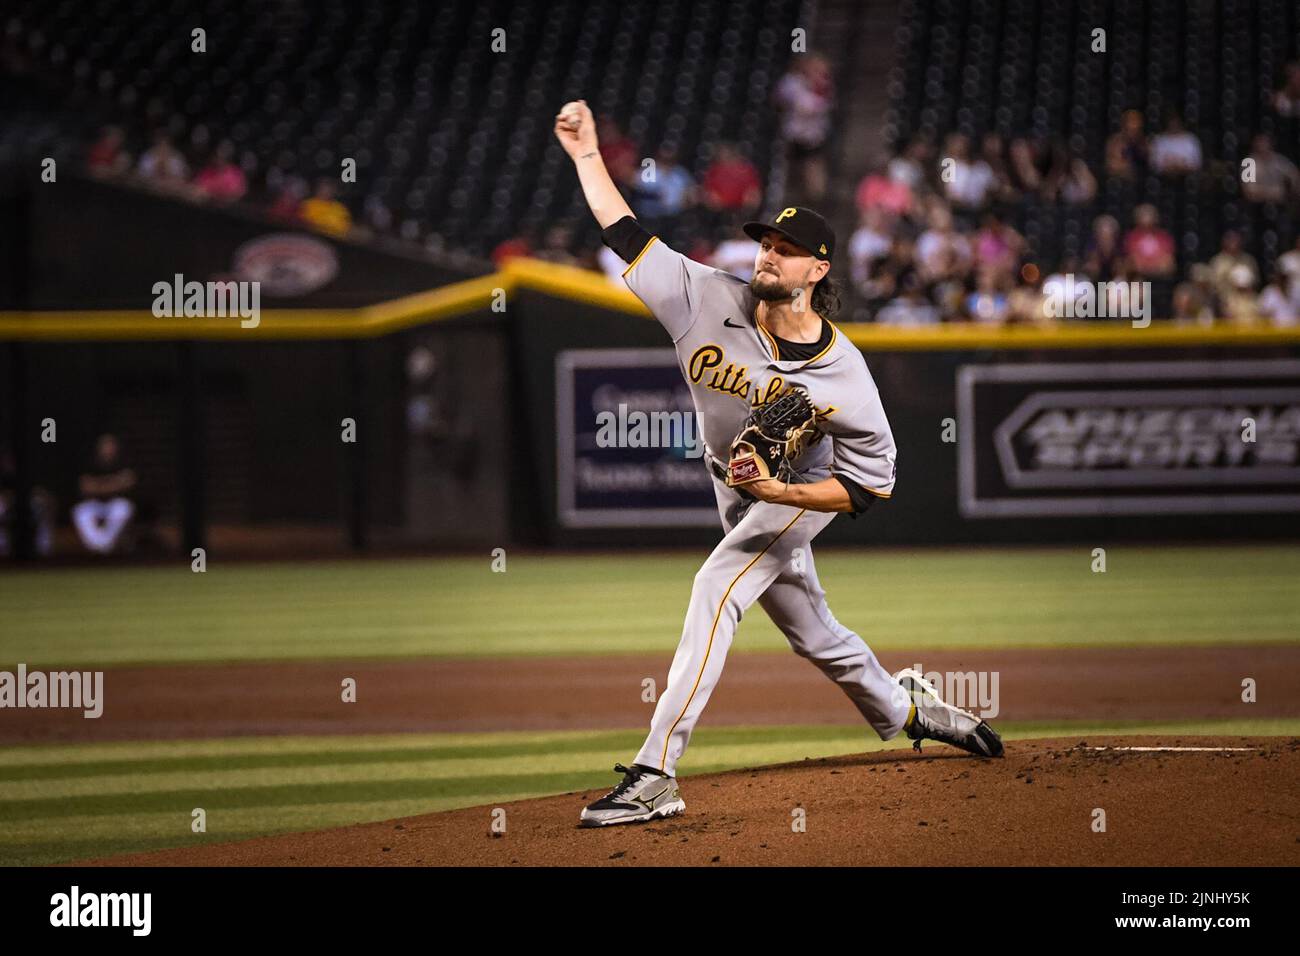 Phoenix, United States. 11th Aug, 2022. Pittsburgh Pirates pitcher JT Brubaker (34) throws against the Arizona Diamondbacks in the first inning during an MLB baseball game, Thursday, August 11, 2022, in Phoenix, Arizona. The Diamondbacks defeated the Pirates 9-3. (Thomas Fernandez/Image of Sport) Photo via Credit: Newscom/Alamy Live News Stock Photo